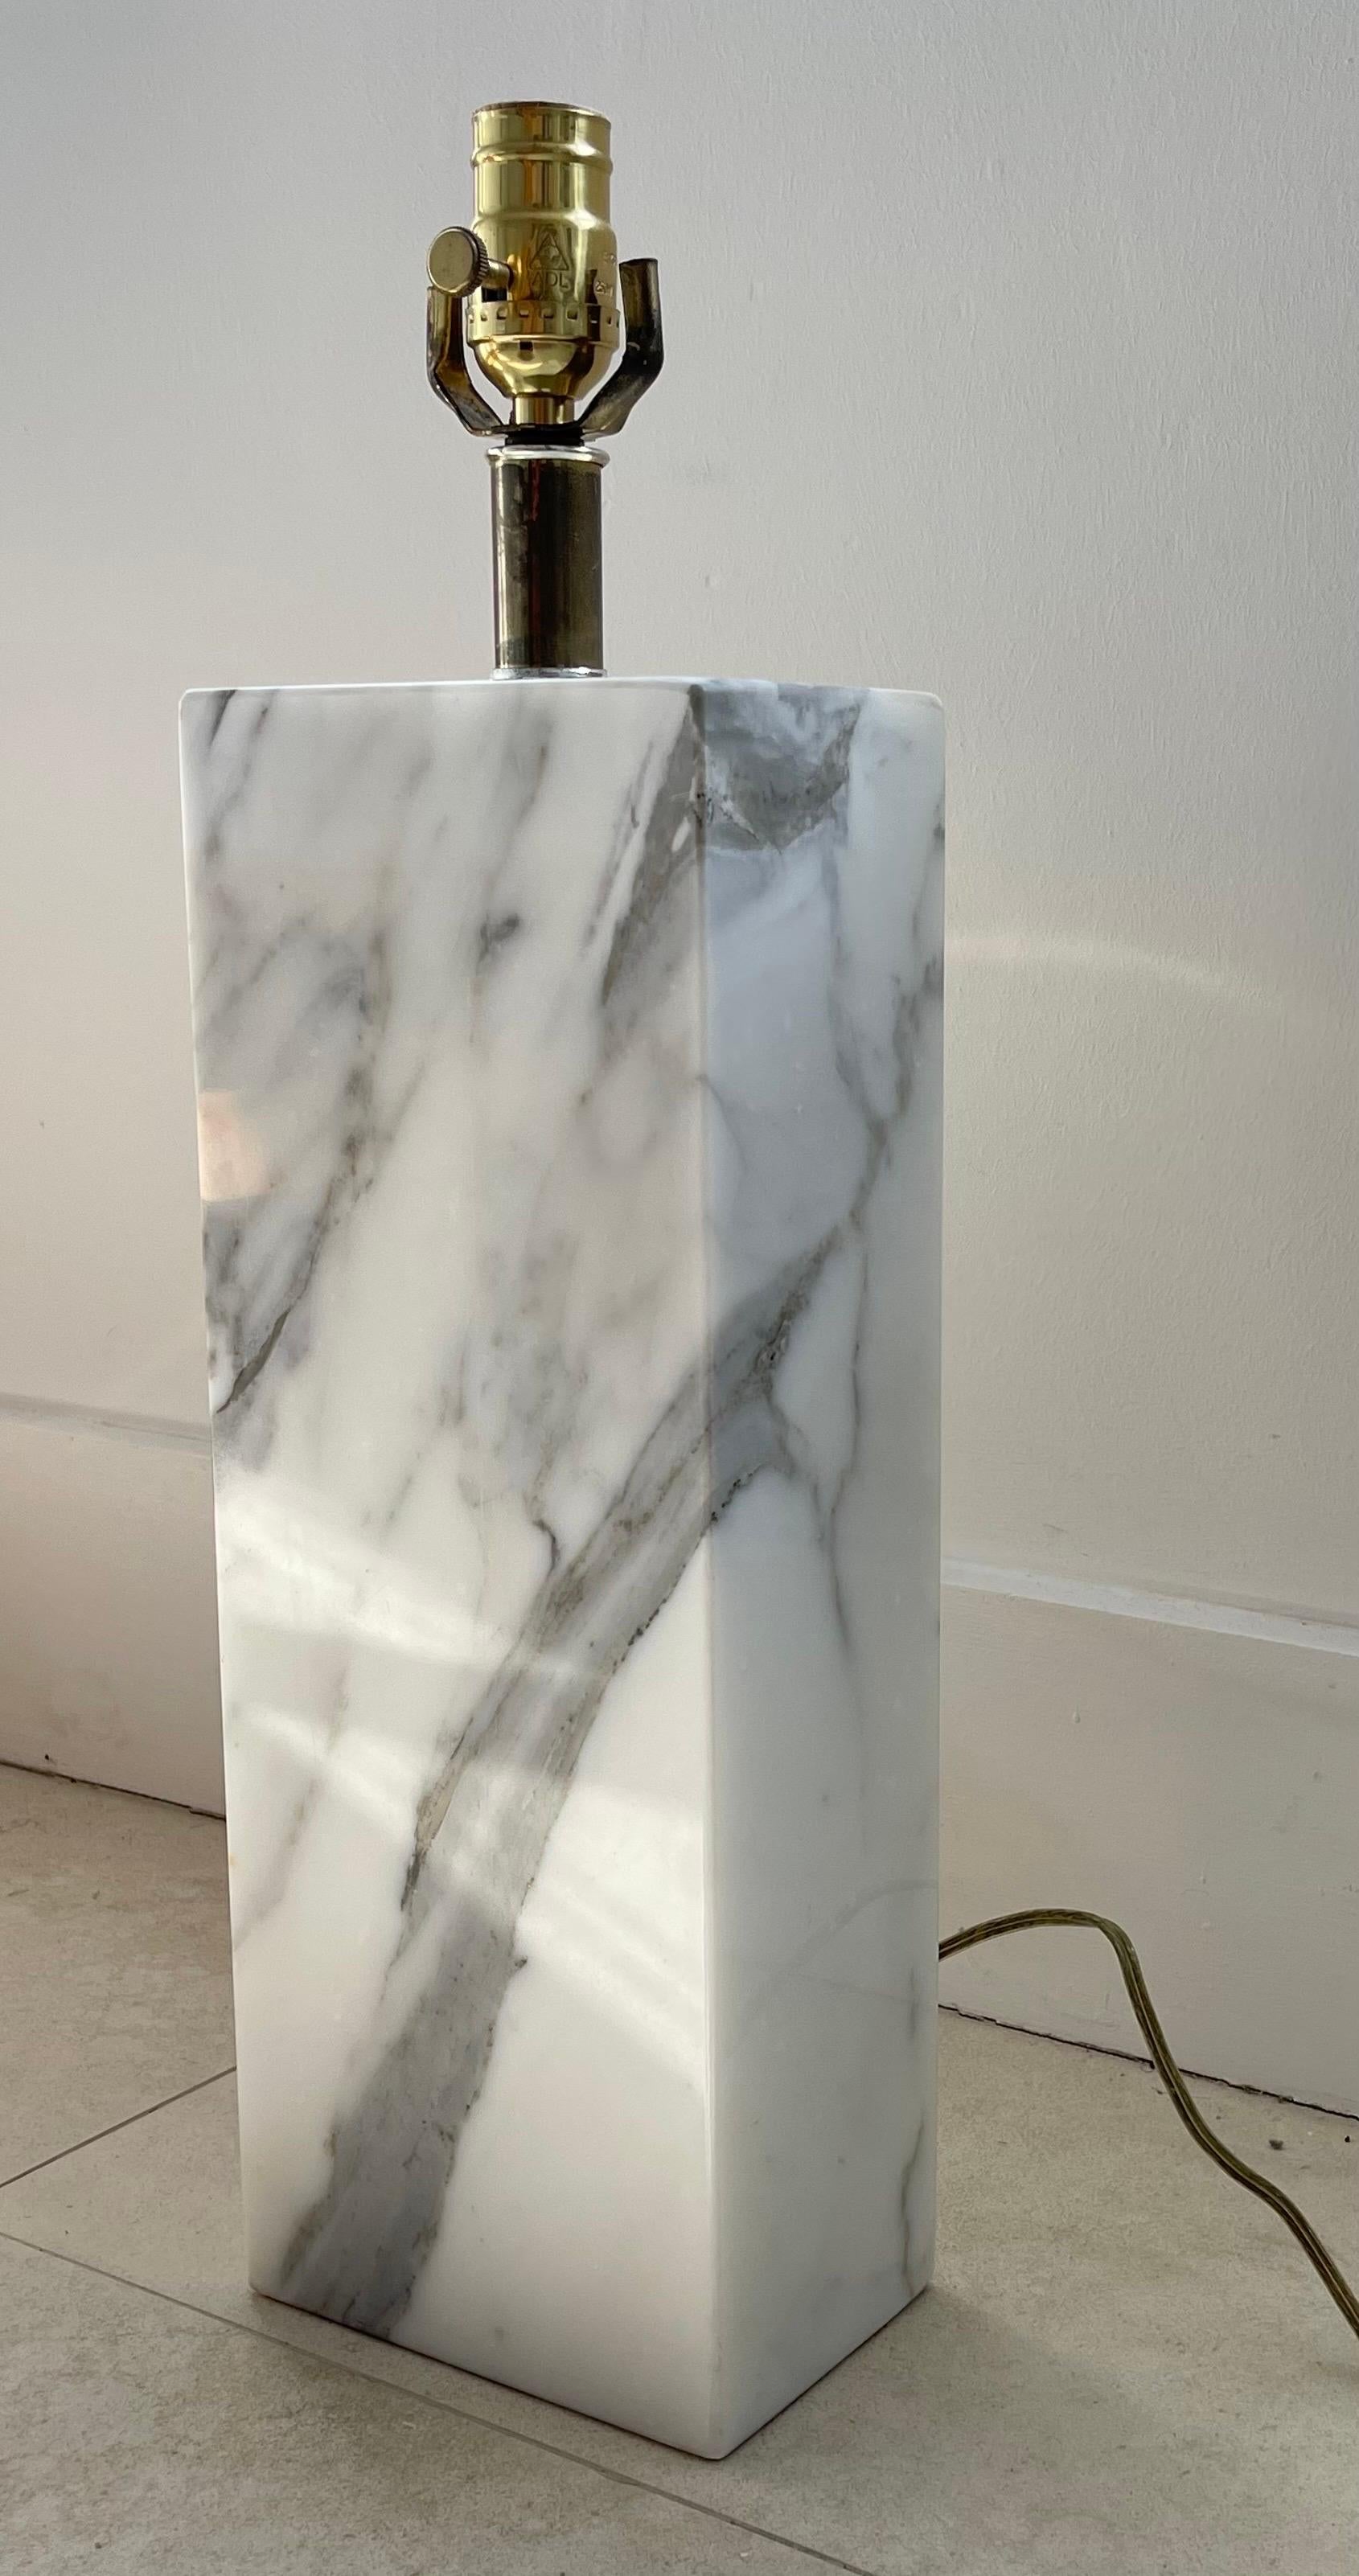 Monolithic statuary marble table lamp, rendered in a solid slab of polished statuary marble with Brass fixturing, designed by Elizabeth Kauffer for Nessen Studio Lighting, circa 1950s.

This lamp is is one of two in an unmatched asymmetrical pair.